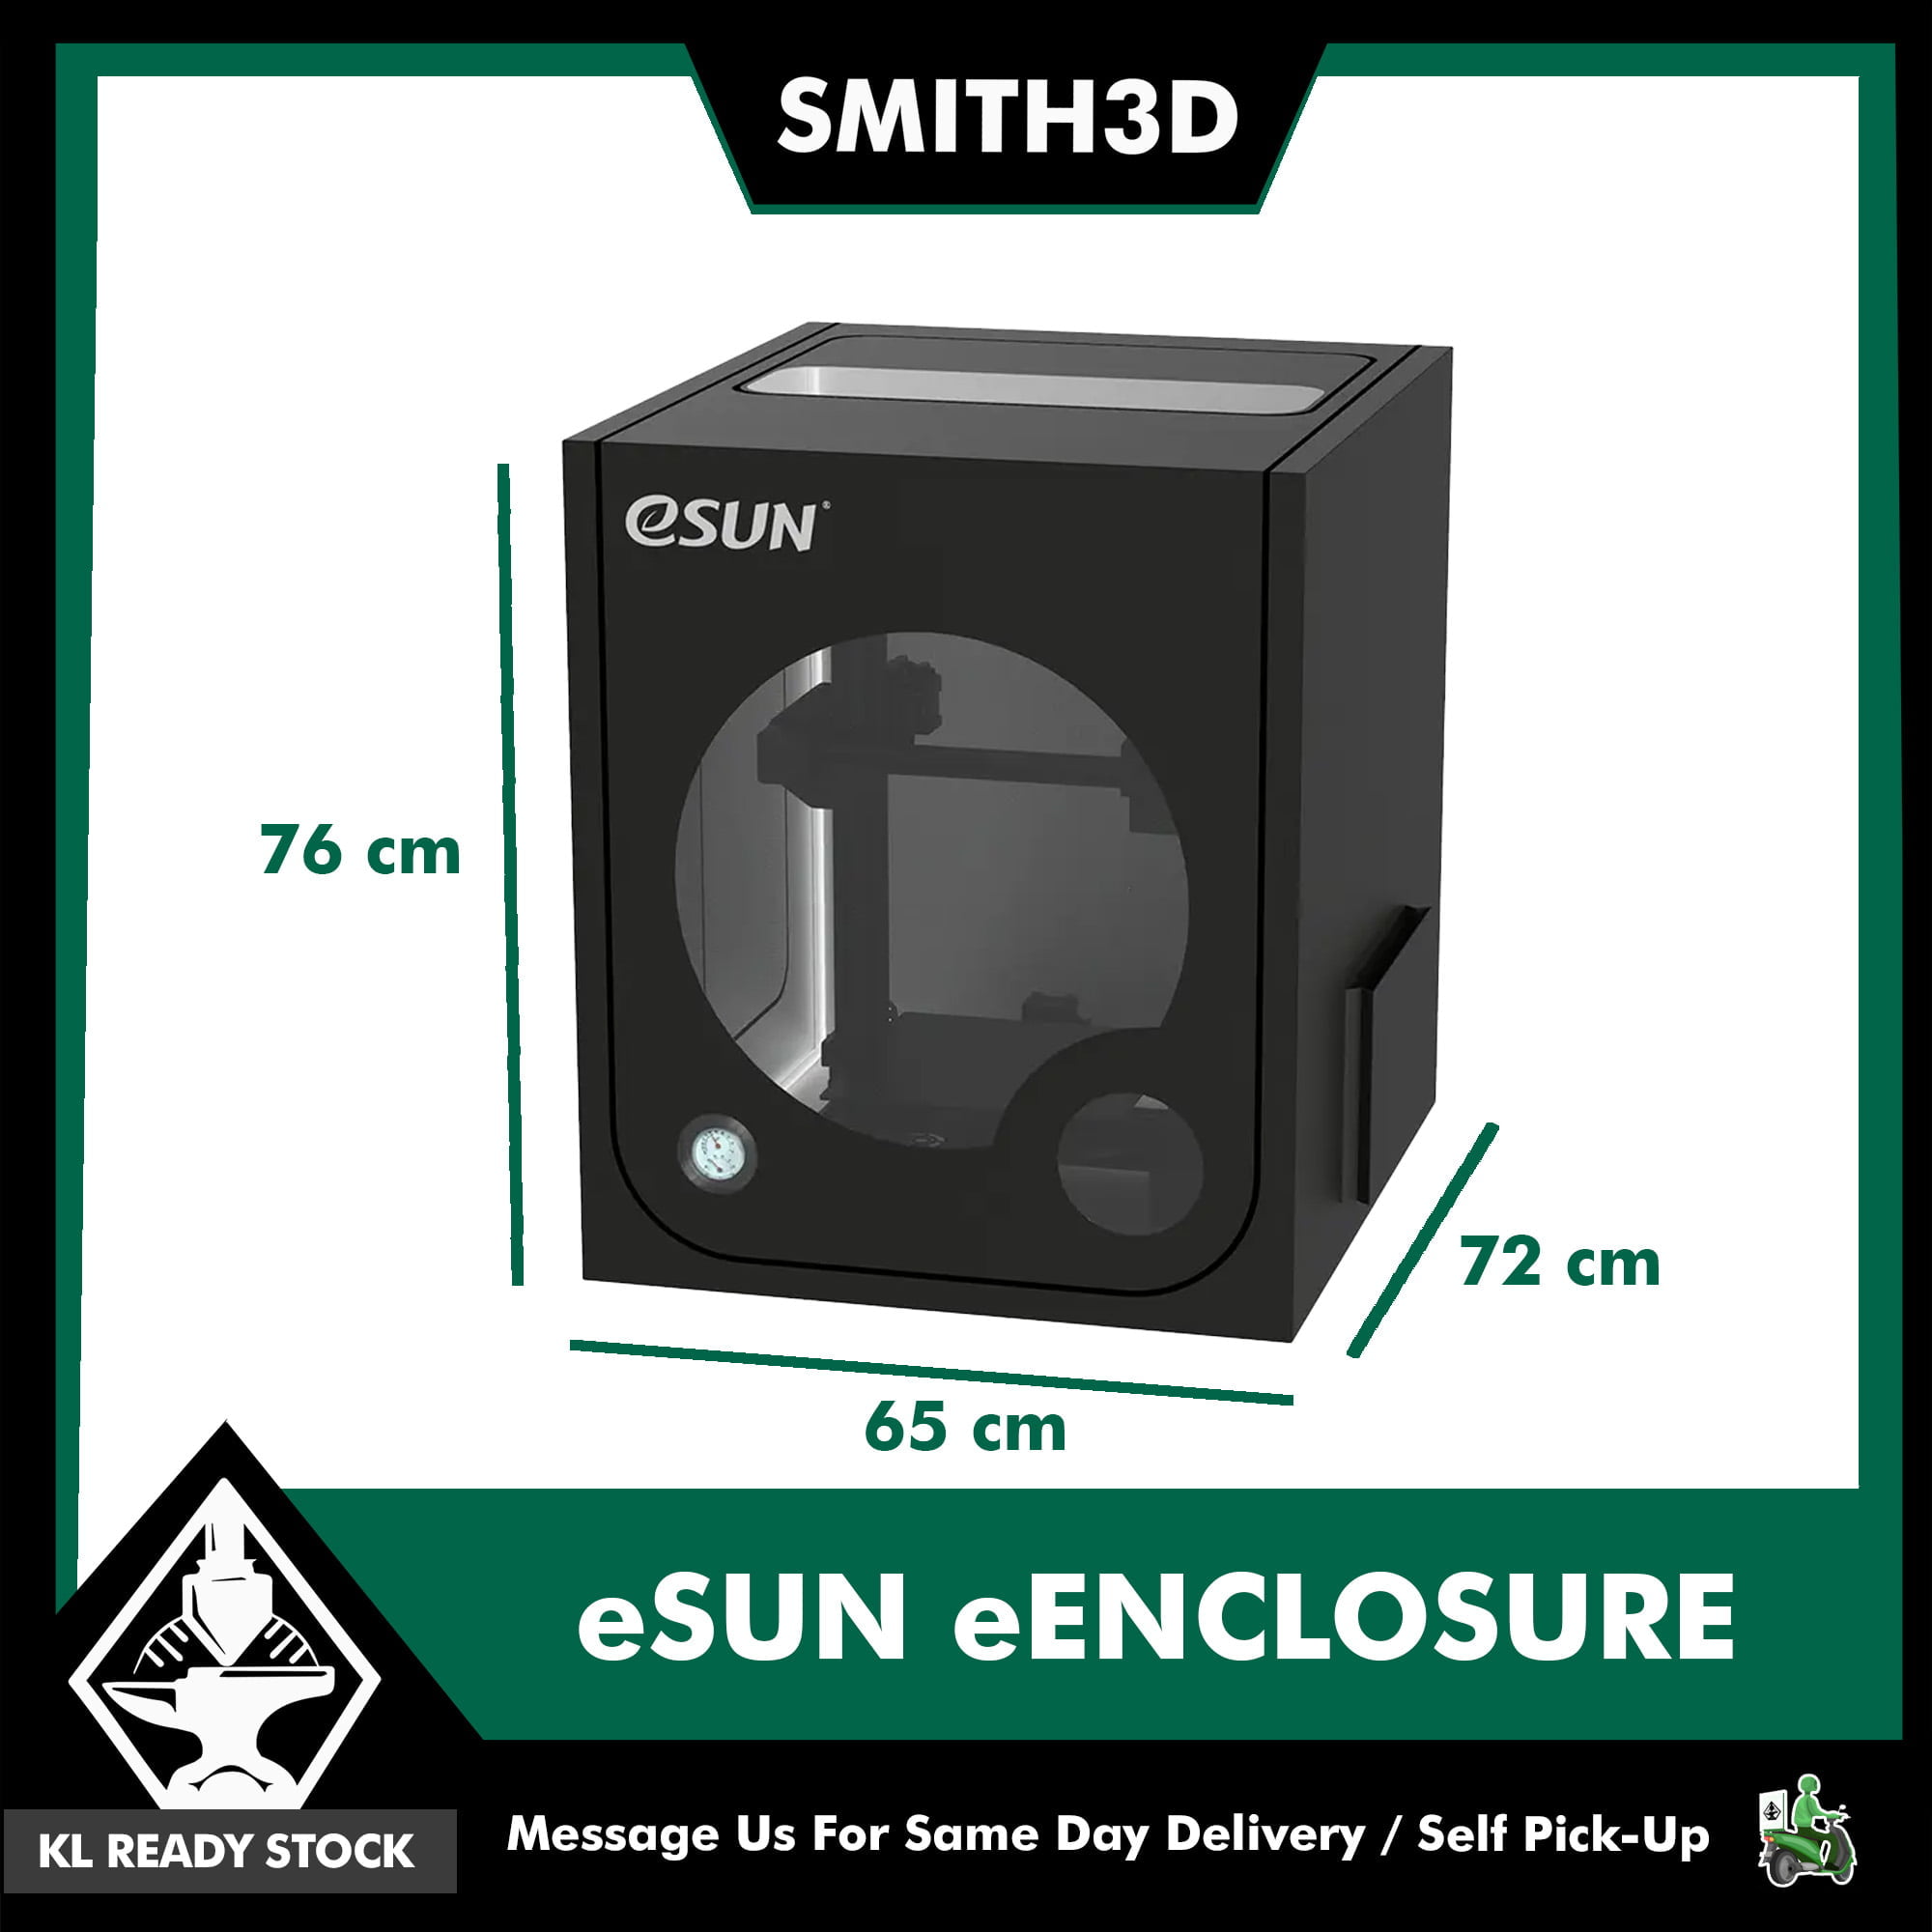 eSun eEnclosure for 3D Printers 65*76*72CM Dual Power Outlet Design -  Smith3D Malaysia